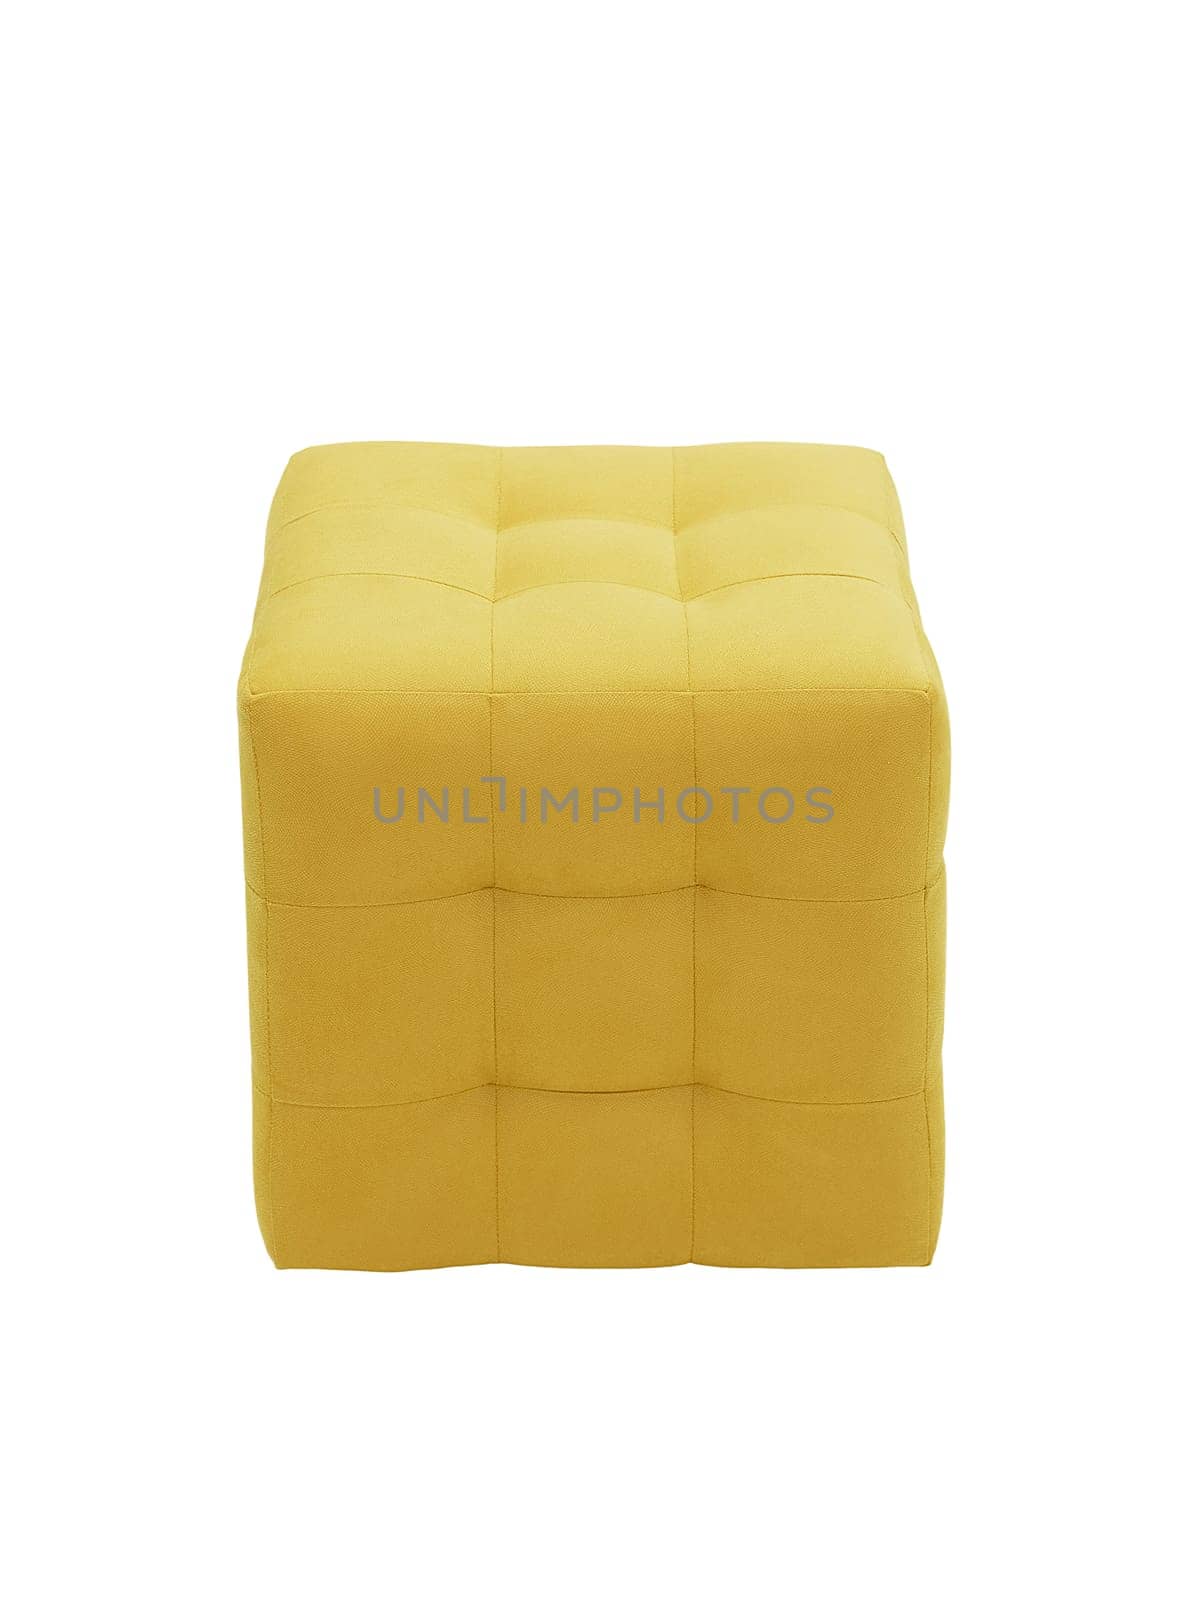 unusual modern yellow cubic padded stool upholstered with soft fabric in strict style isolated on white background. creative approach to making furniture in shape of geometric figures